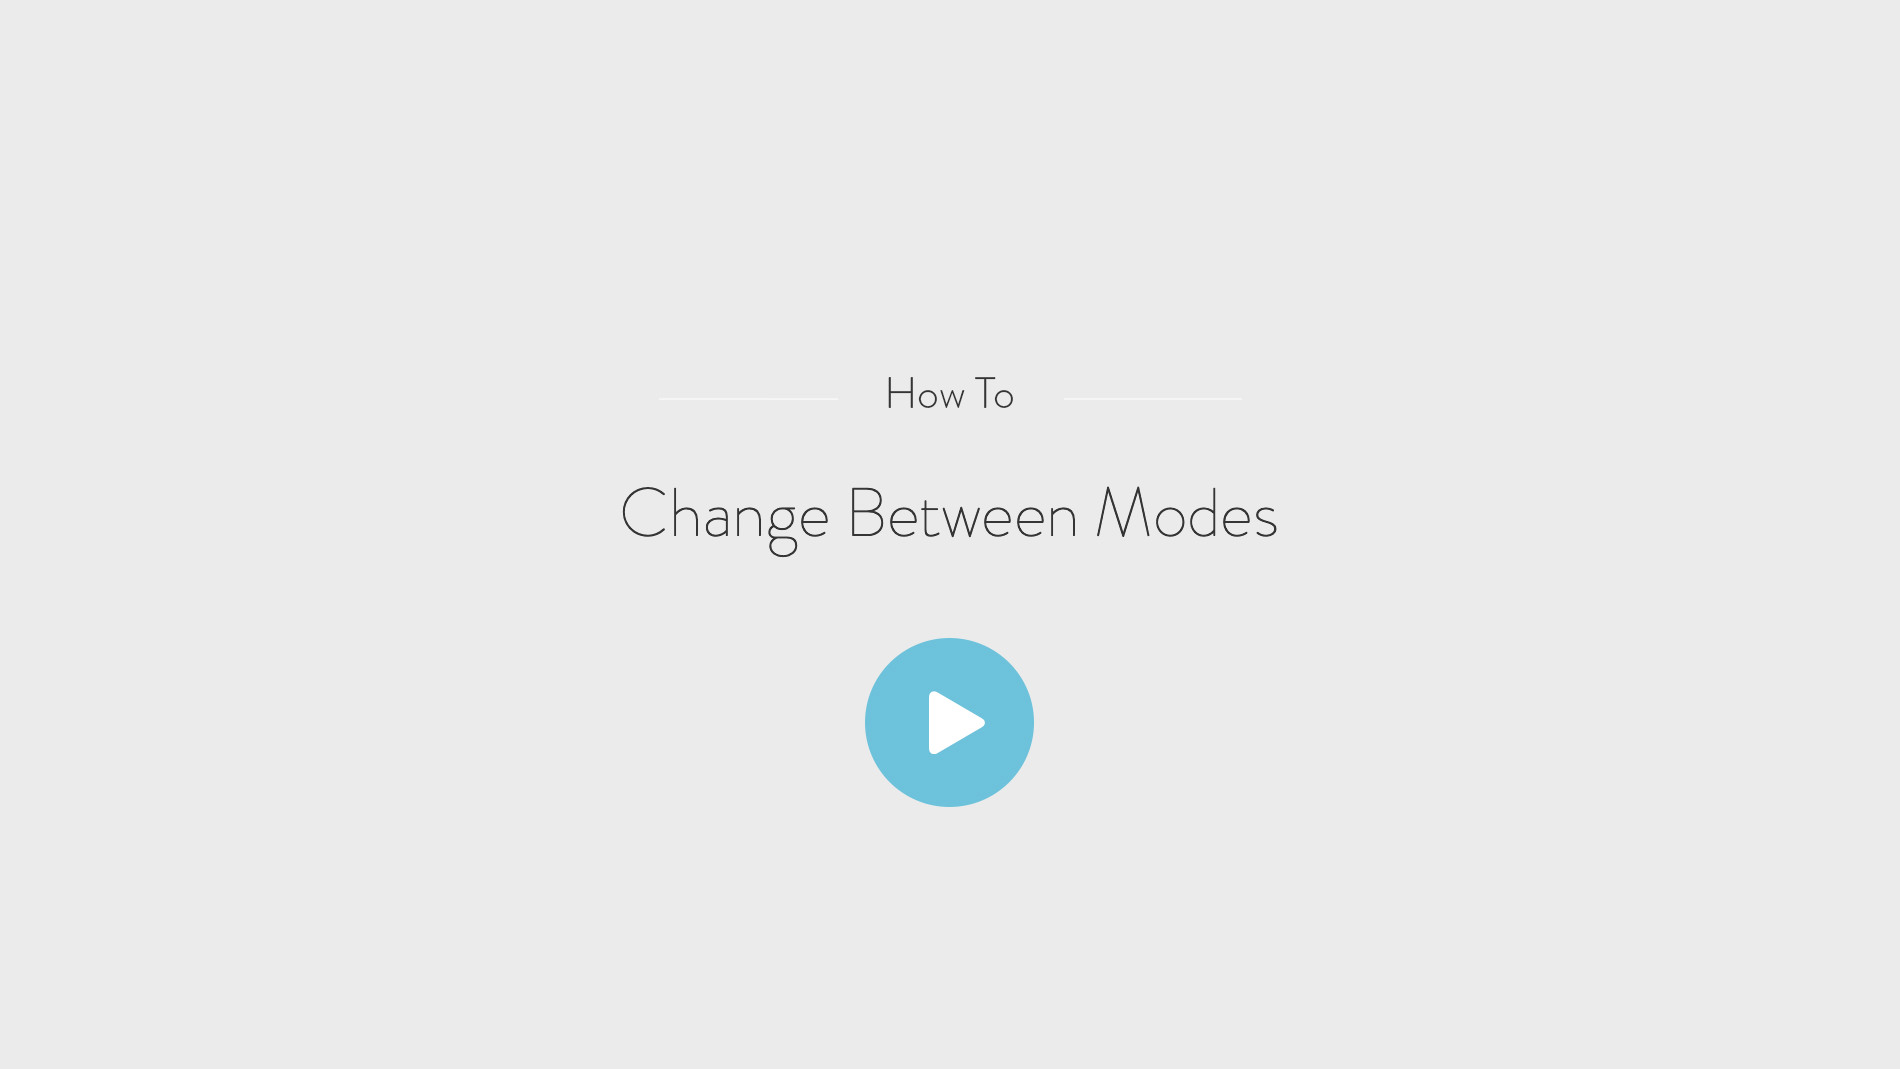 How to - Change between modes